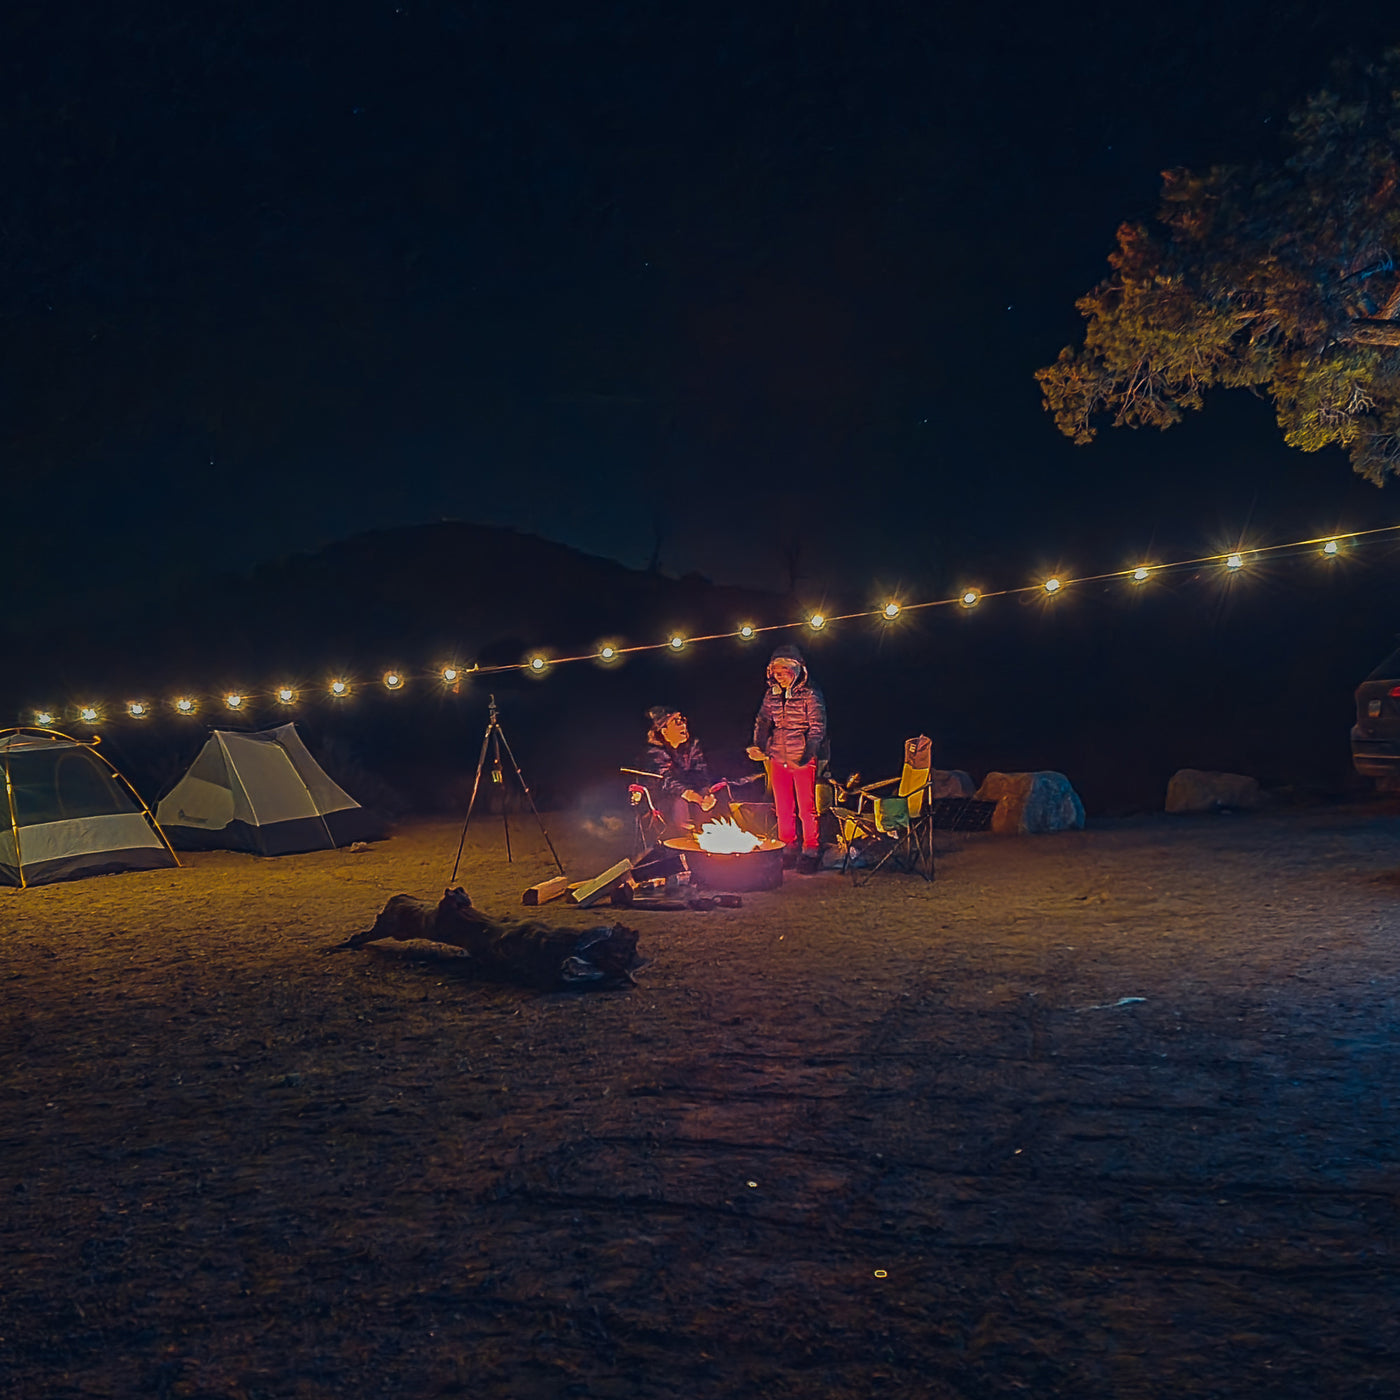 String lights used in campgrounds